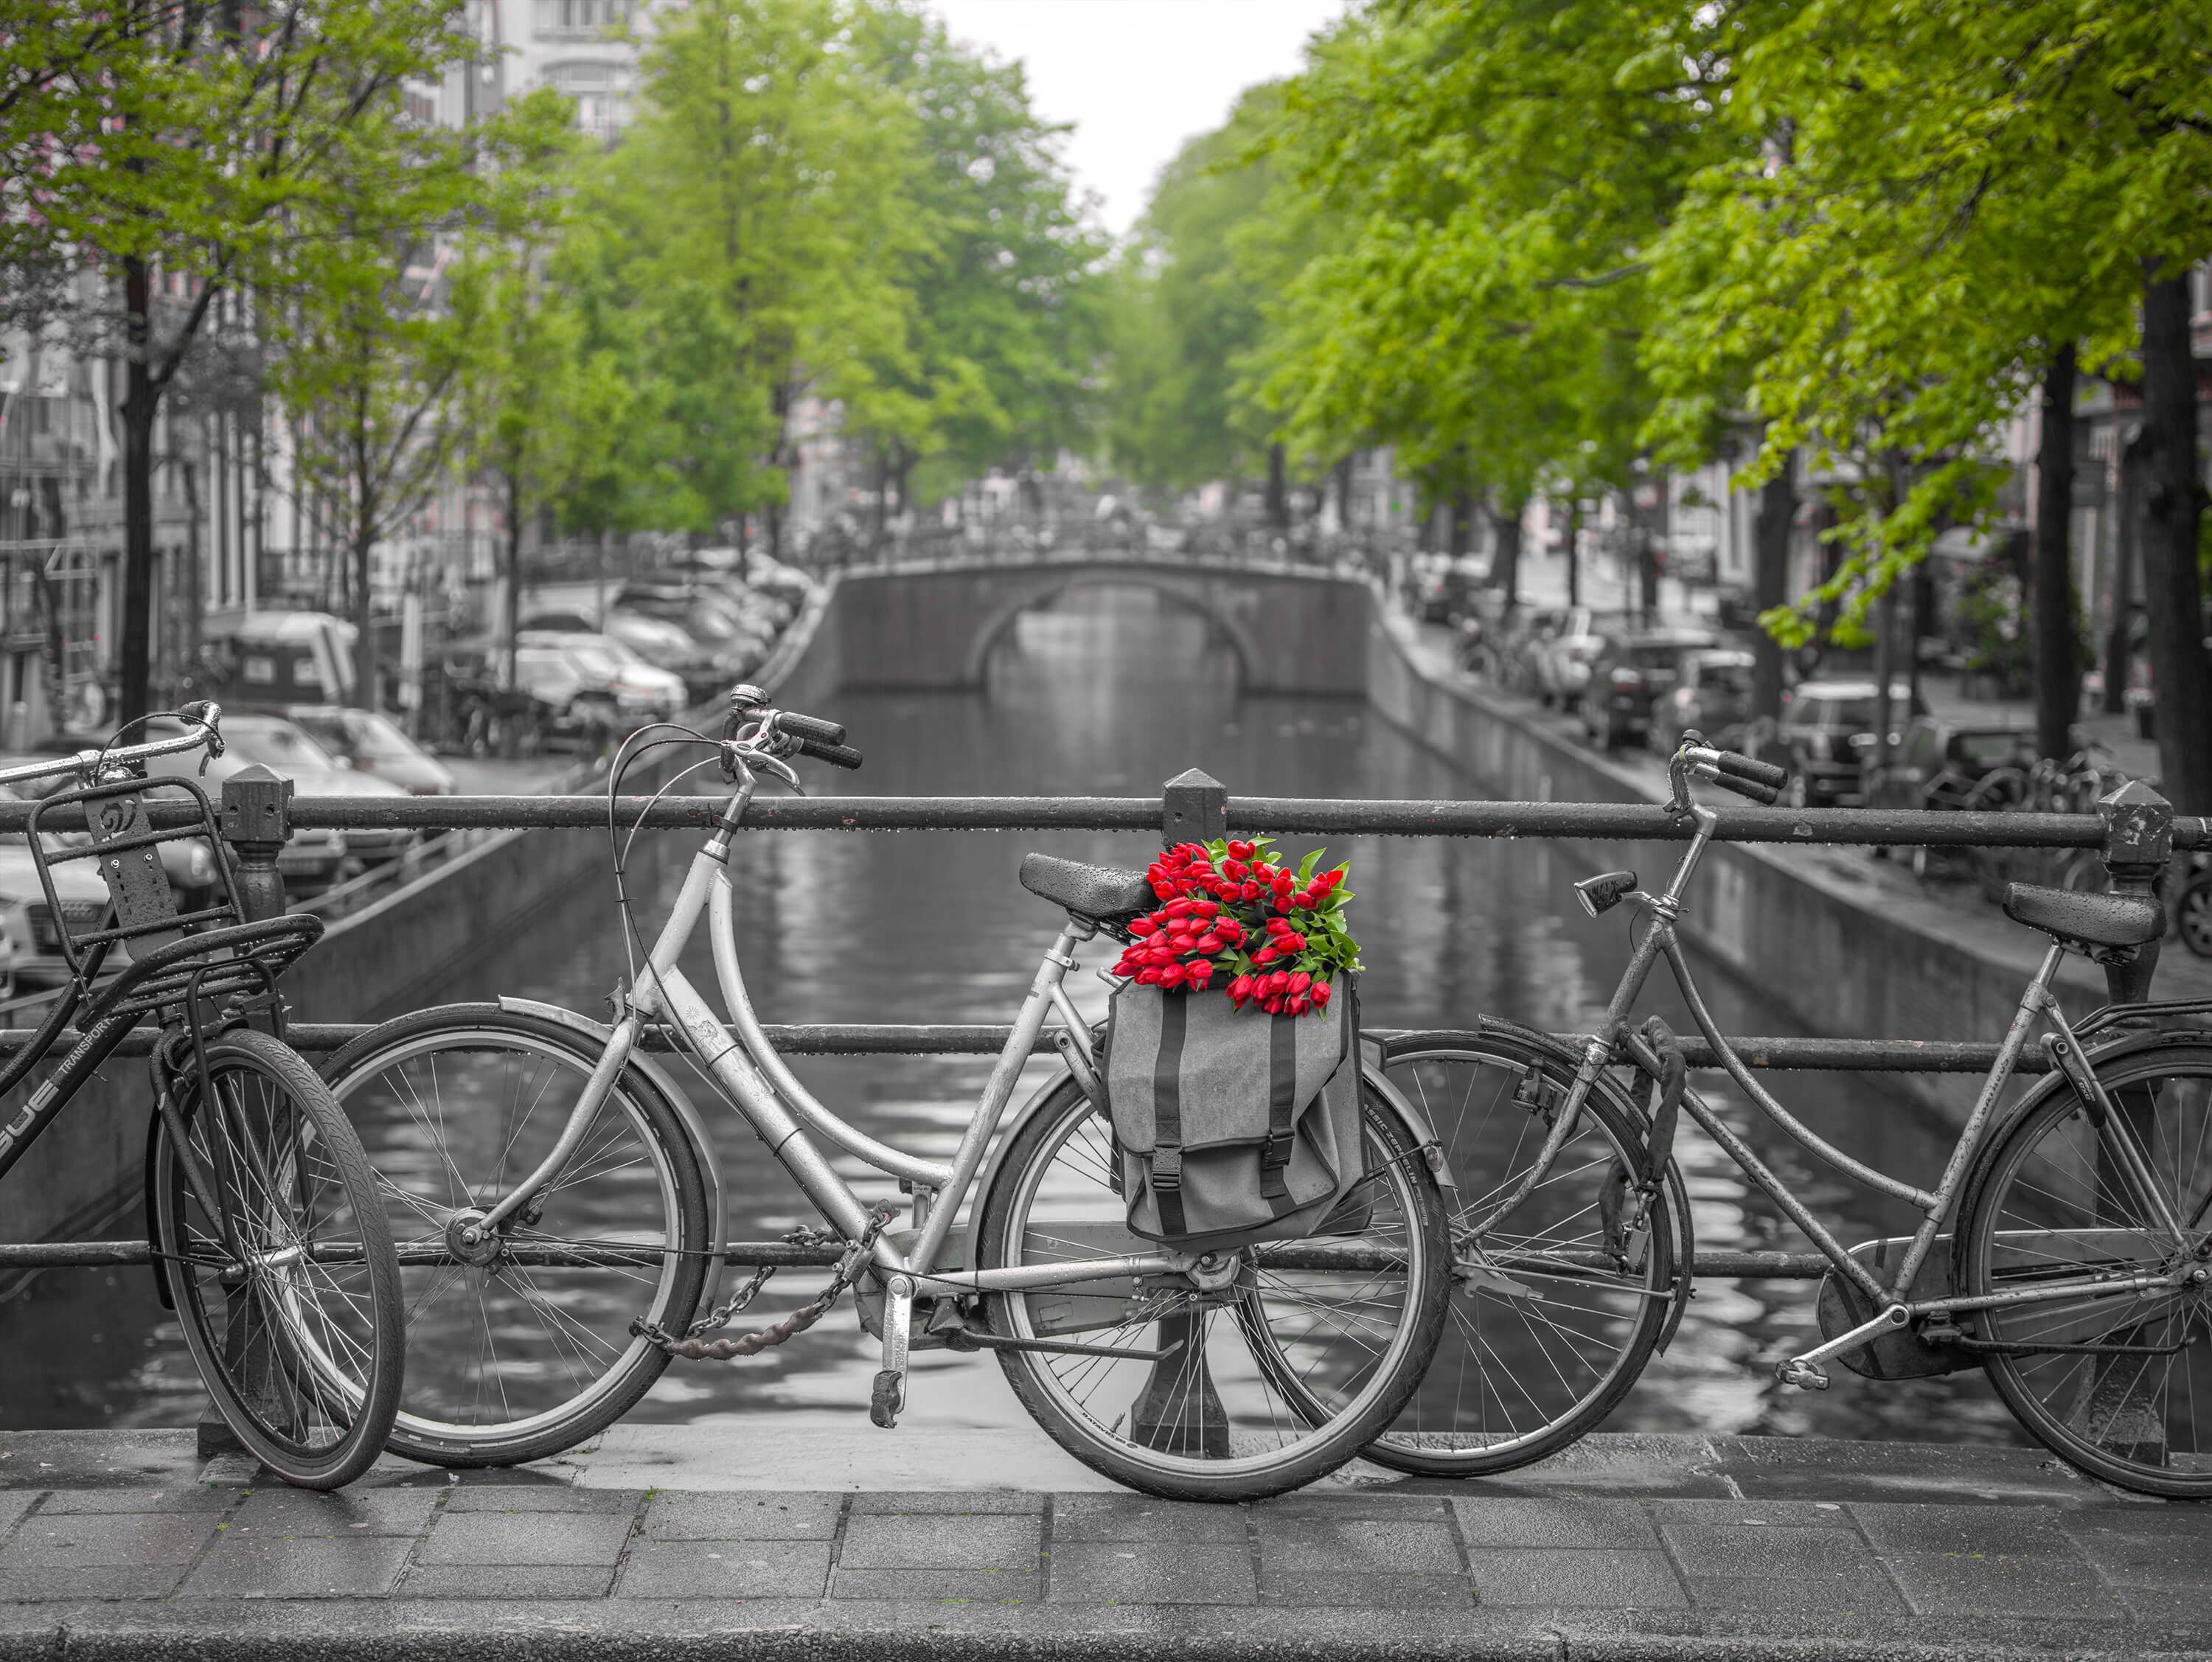  Bicycle with flowers